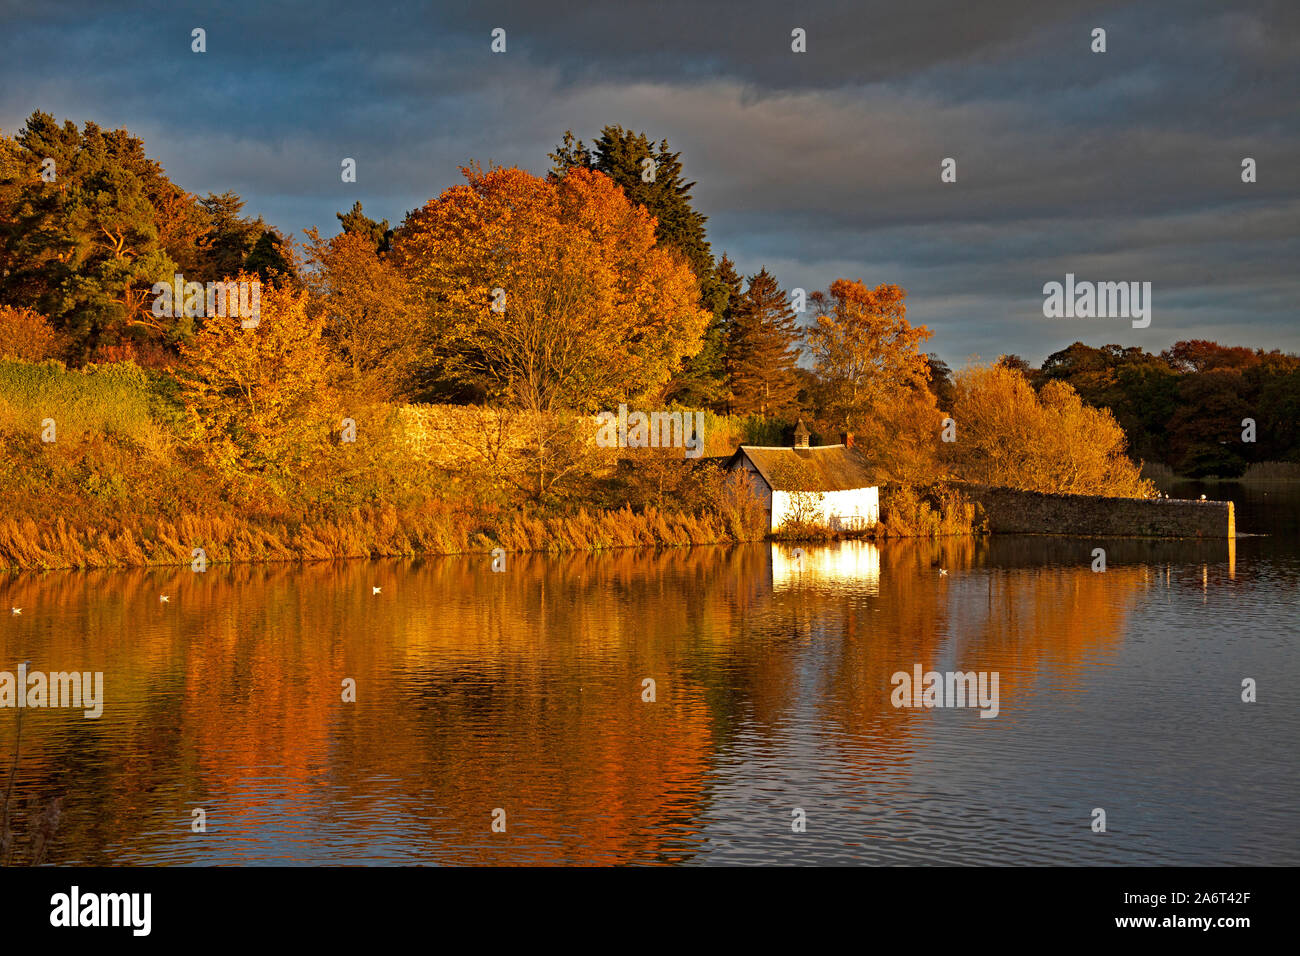 Duddingston Loch, Edinburgh, Scotland, UK weather. 28th October 2019. The Autumnal colours of the decidious trees and white boat house reflected in Duddingston Loch just before sunset. Stock Photo